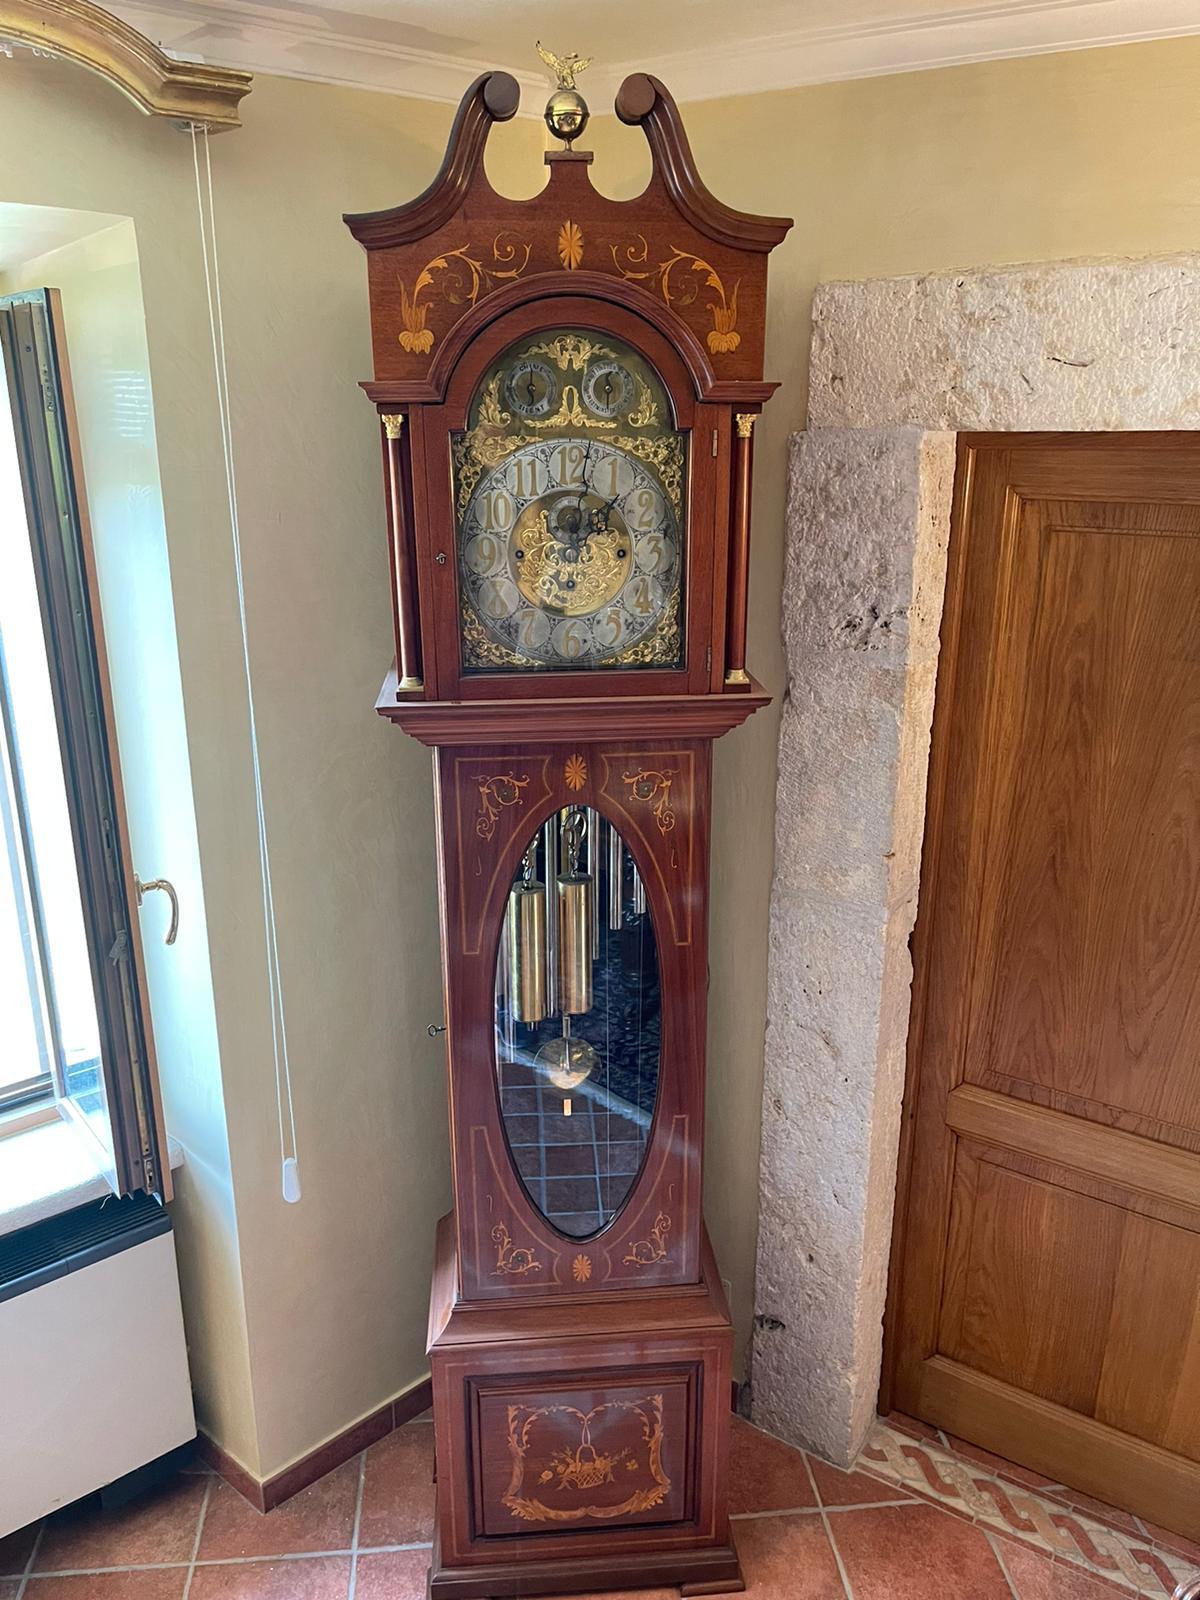 Magnificent example of a grandfather clock, England , last decade of the 19th century, late Victorian period, with influences from the coming Edwardian style. We are dealing with a true work of art, a block of flamed mahogany, completely inlaid with